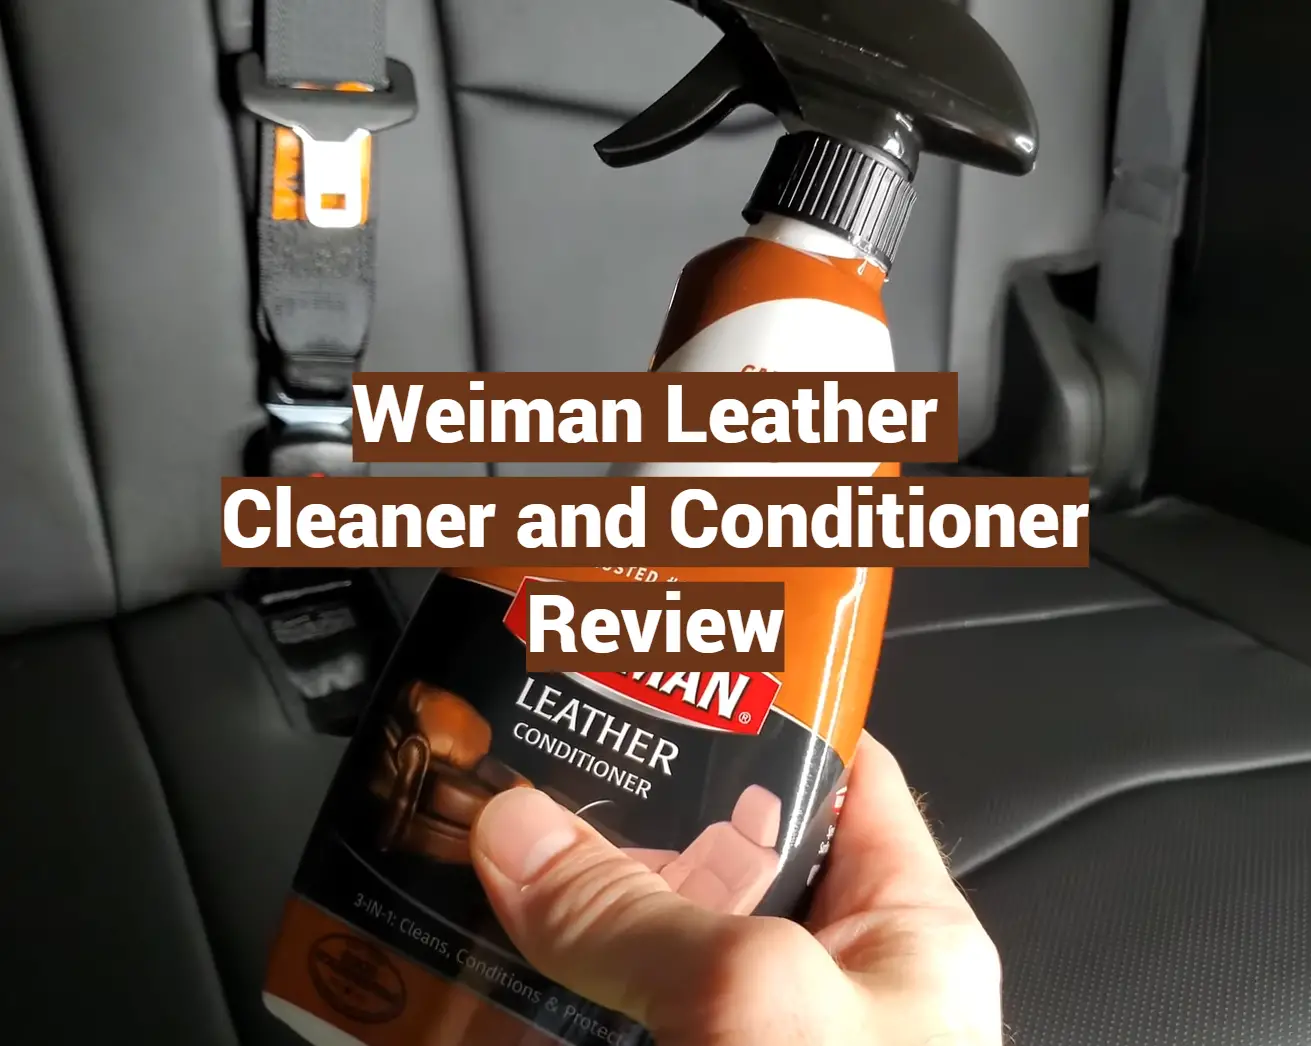 Weiman Leather Cleaner and Conditioner Review